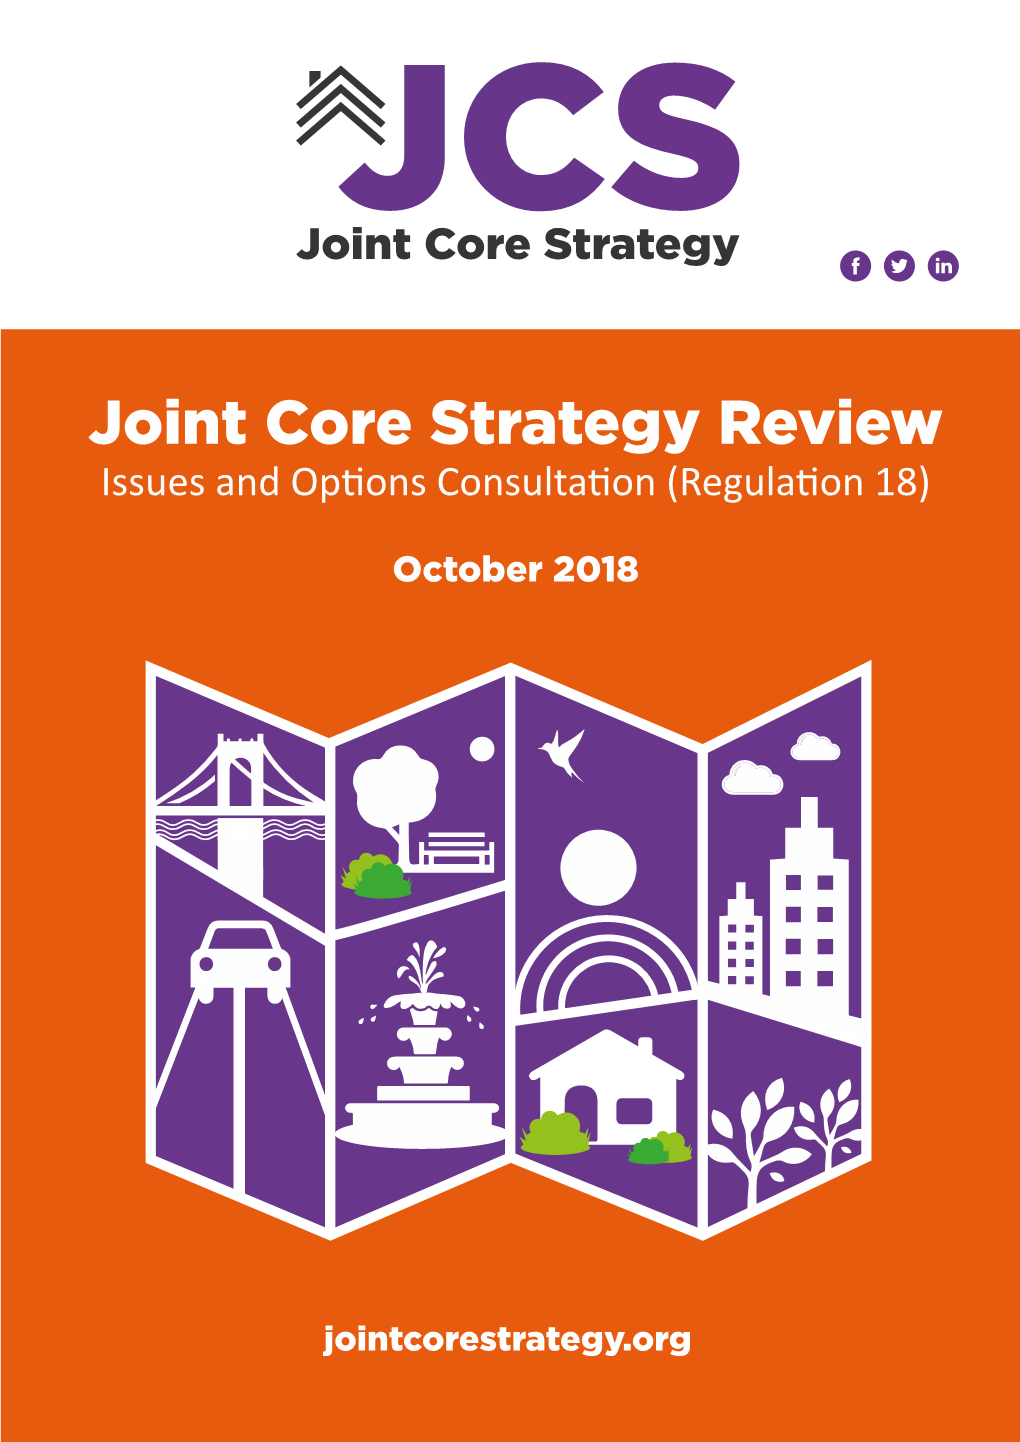 Joint Core Strategy Review Issues and Options Consultation (Regulation 18)